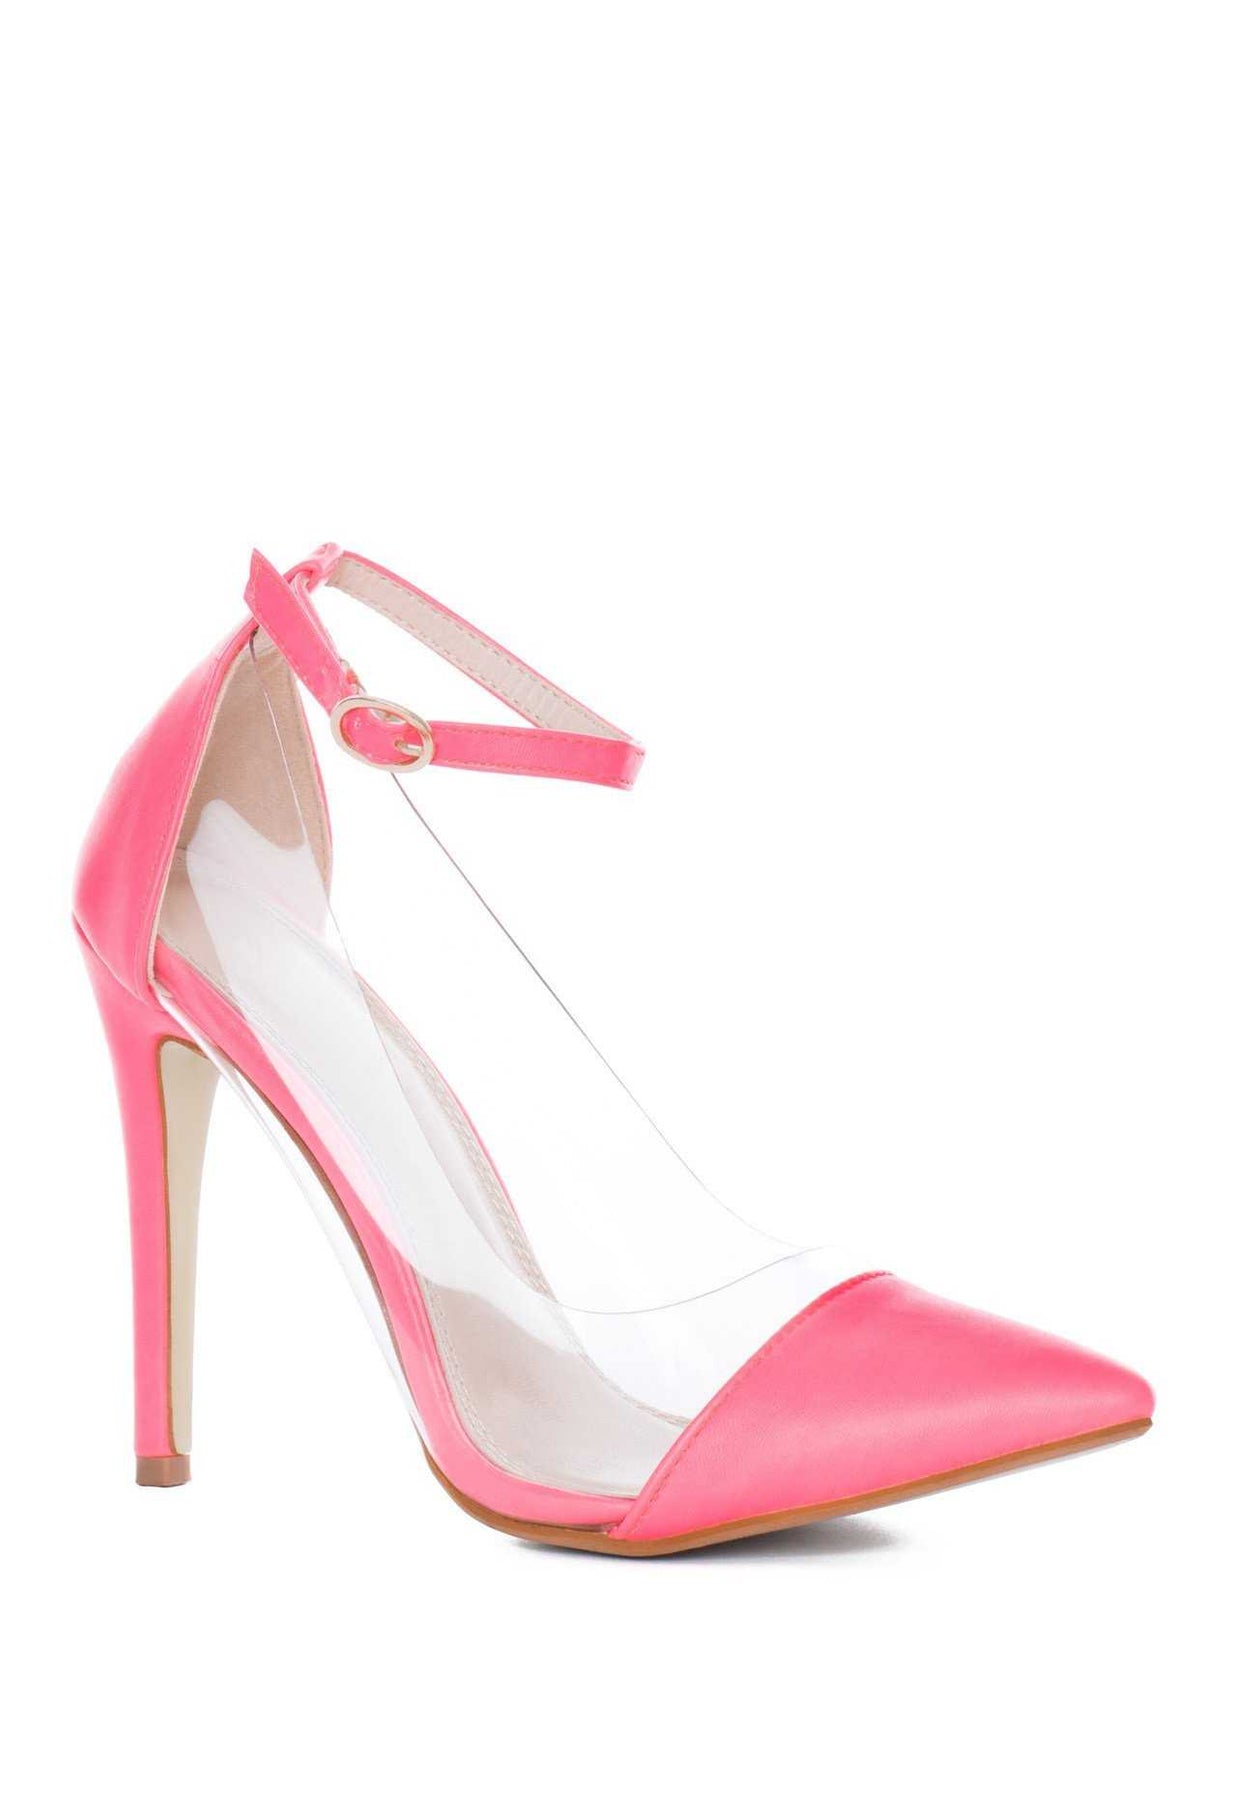 Shut Up And Dance Pumps- Neon Pink by 